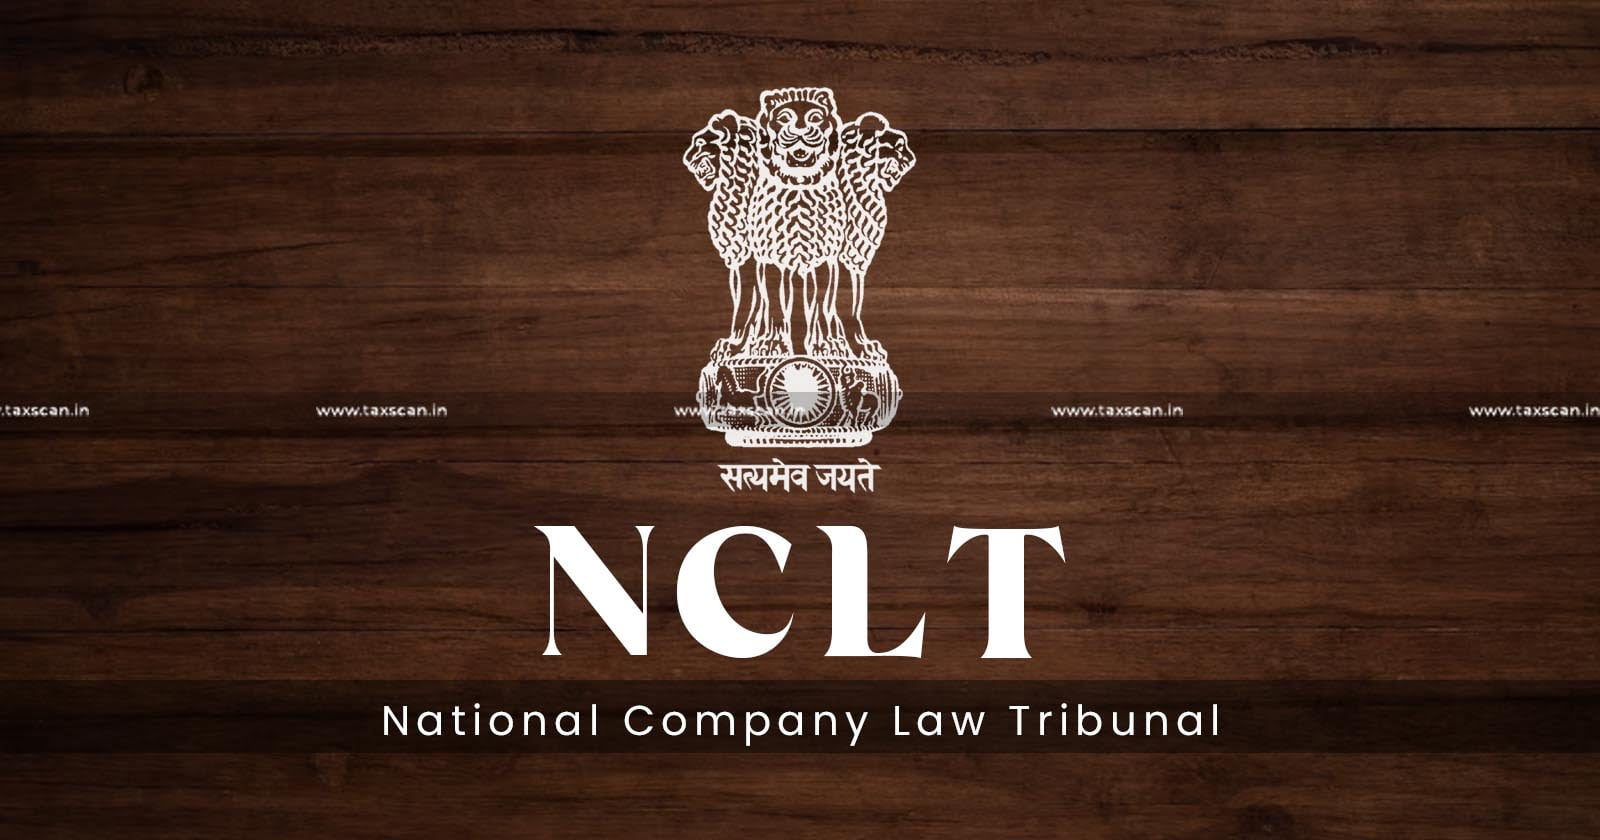 CESTAT - Appeal - resolution plan by NCLT - Appeal can be Abated as per Rule 22 - Bangalore bench - taxscan